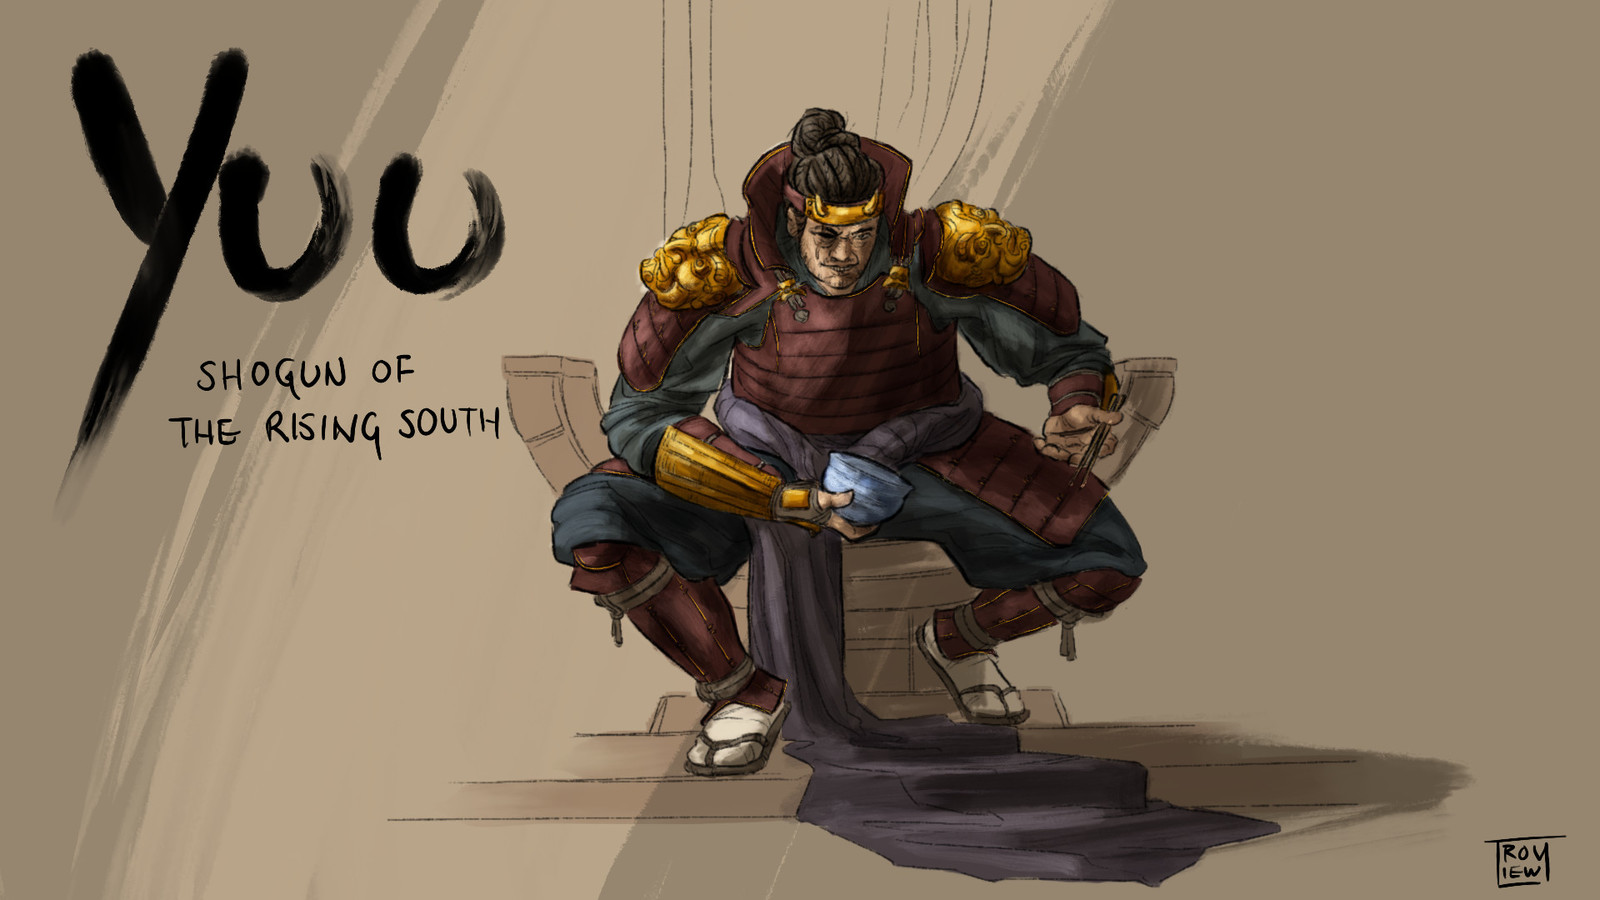 Yuu, Shogun of the Rising South is the idea of a man of hunger. Hunger for anything and everything from fine foods, extravagantly precious metalworks, to political and military might. Yuu has risen within the power vacuum of the previous emperor’s demise.